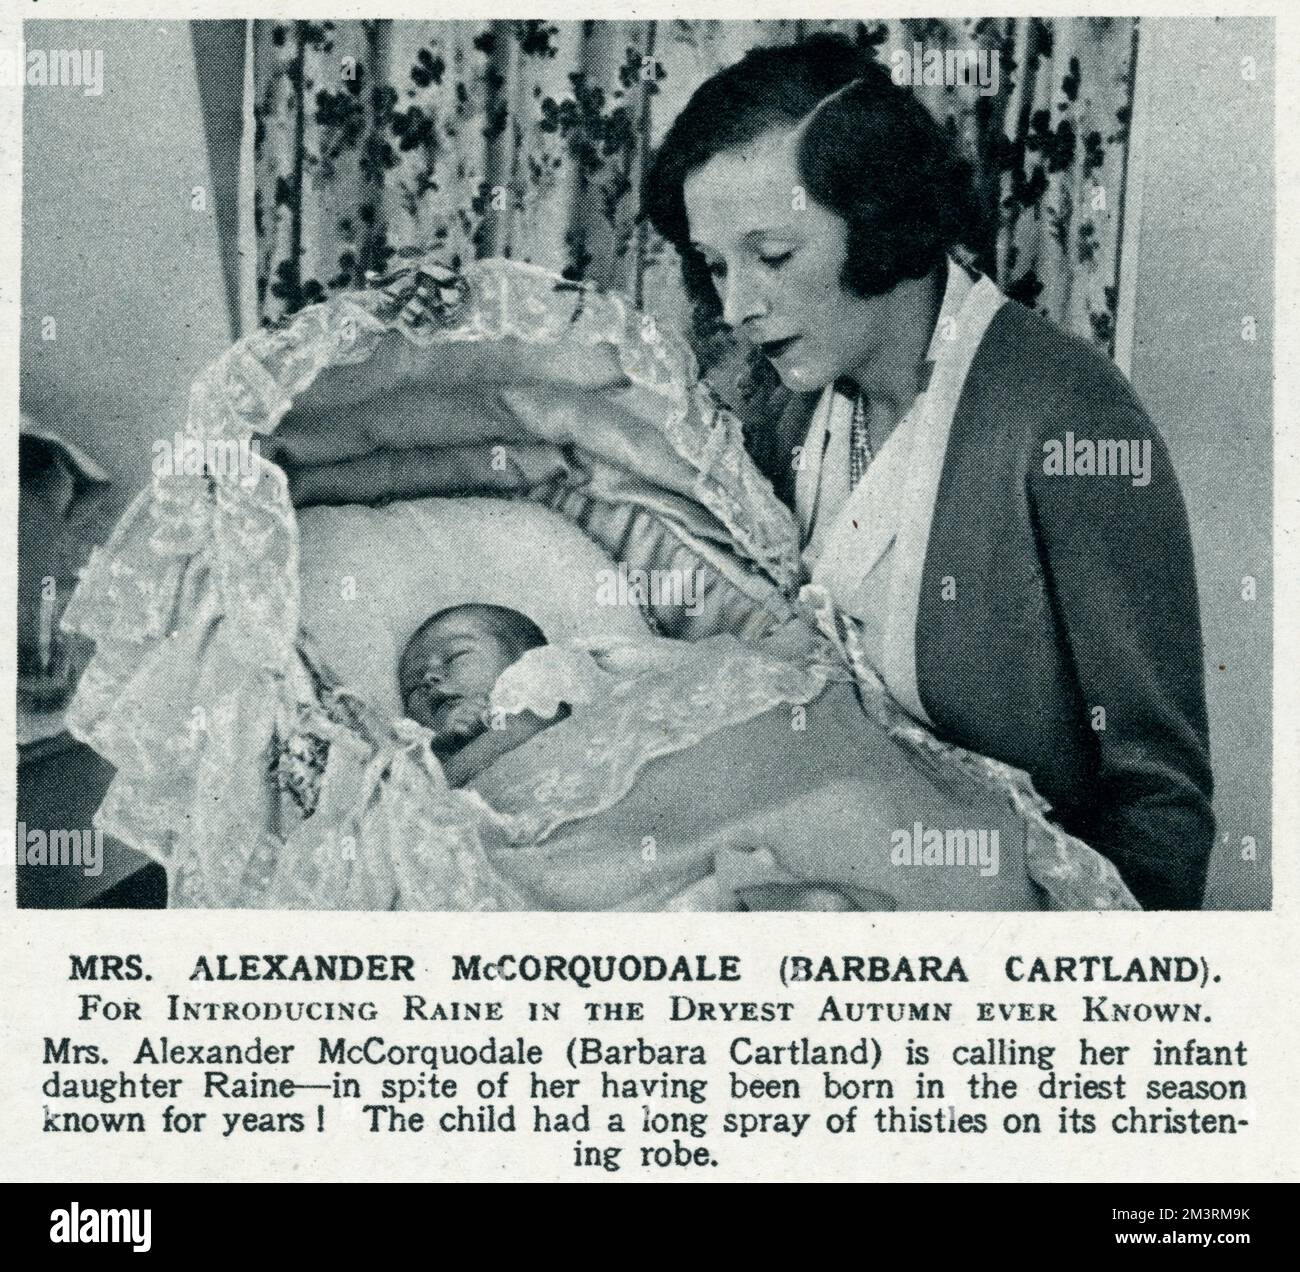 Mrs Alexander McCorquodale, aka prolific writer, Barbara Cartland (1901-2000), pictured with her newborn daughter Raine (1929-2016), later Countess Raine Spencer, stepmother to Diana, Princess of Wales.       Date: 1929 Stock Photo